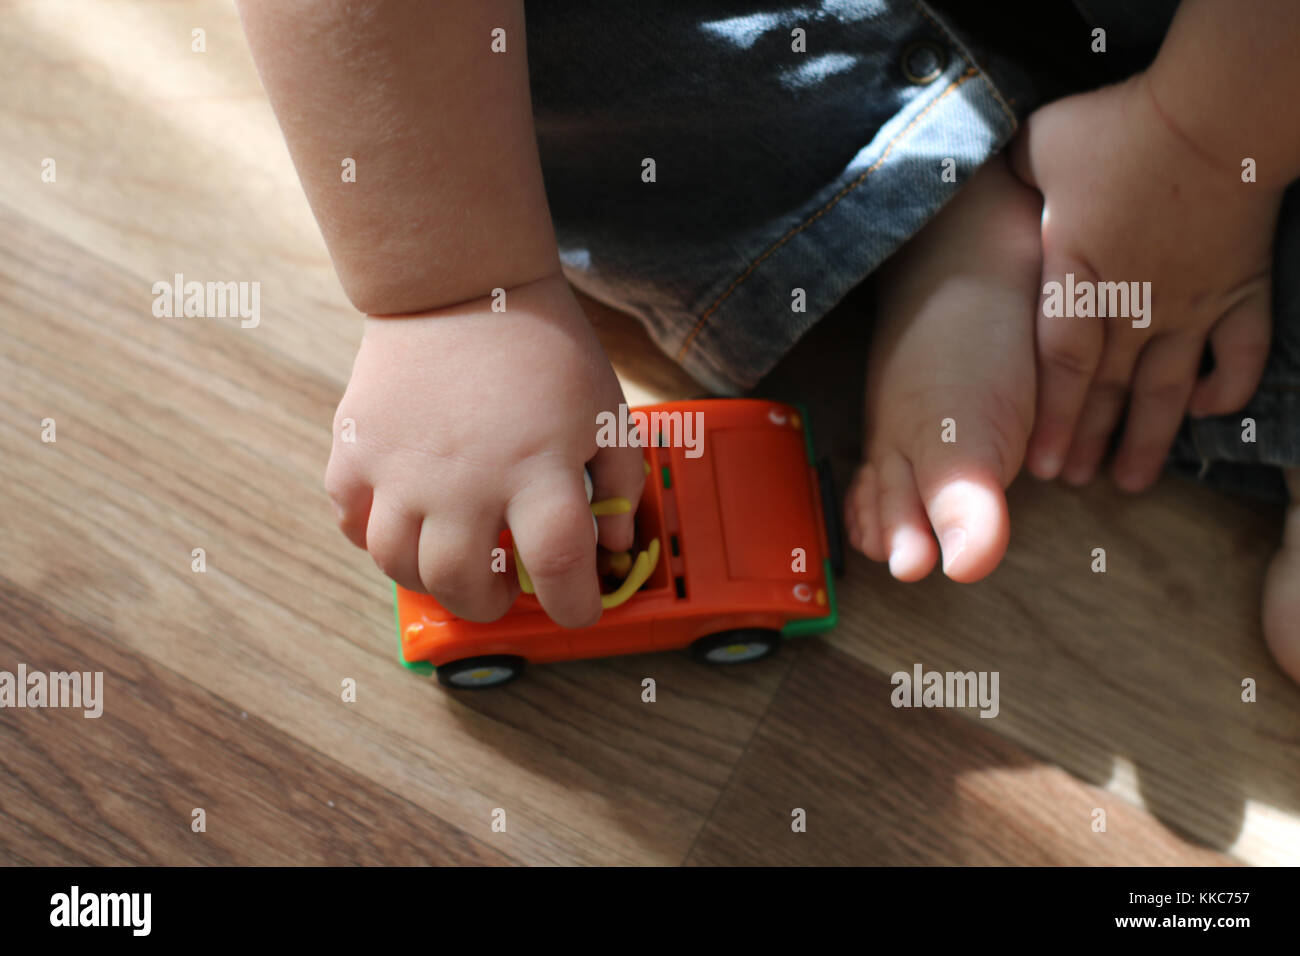 Cute little baby playing with toy car on the floor. Close up baby hands holding toy car and little barefoot feet. Stock Photo